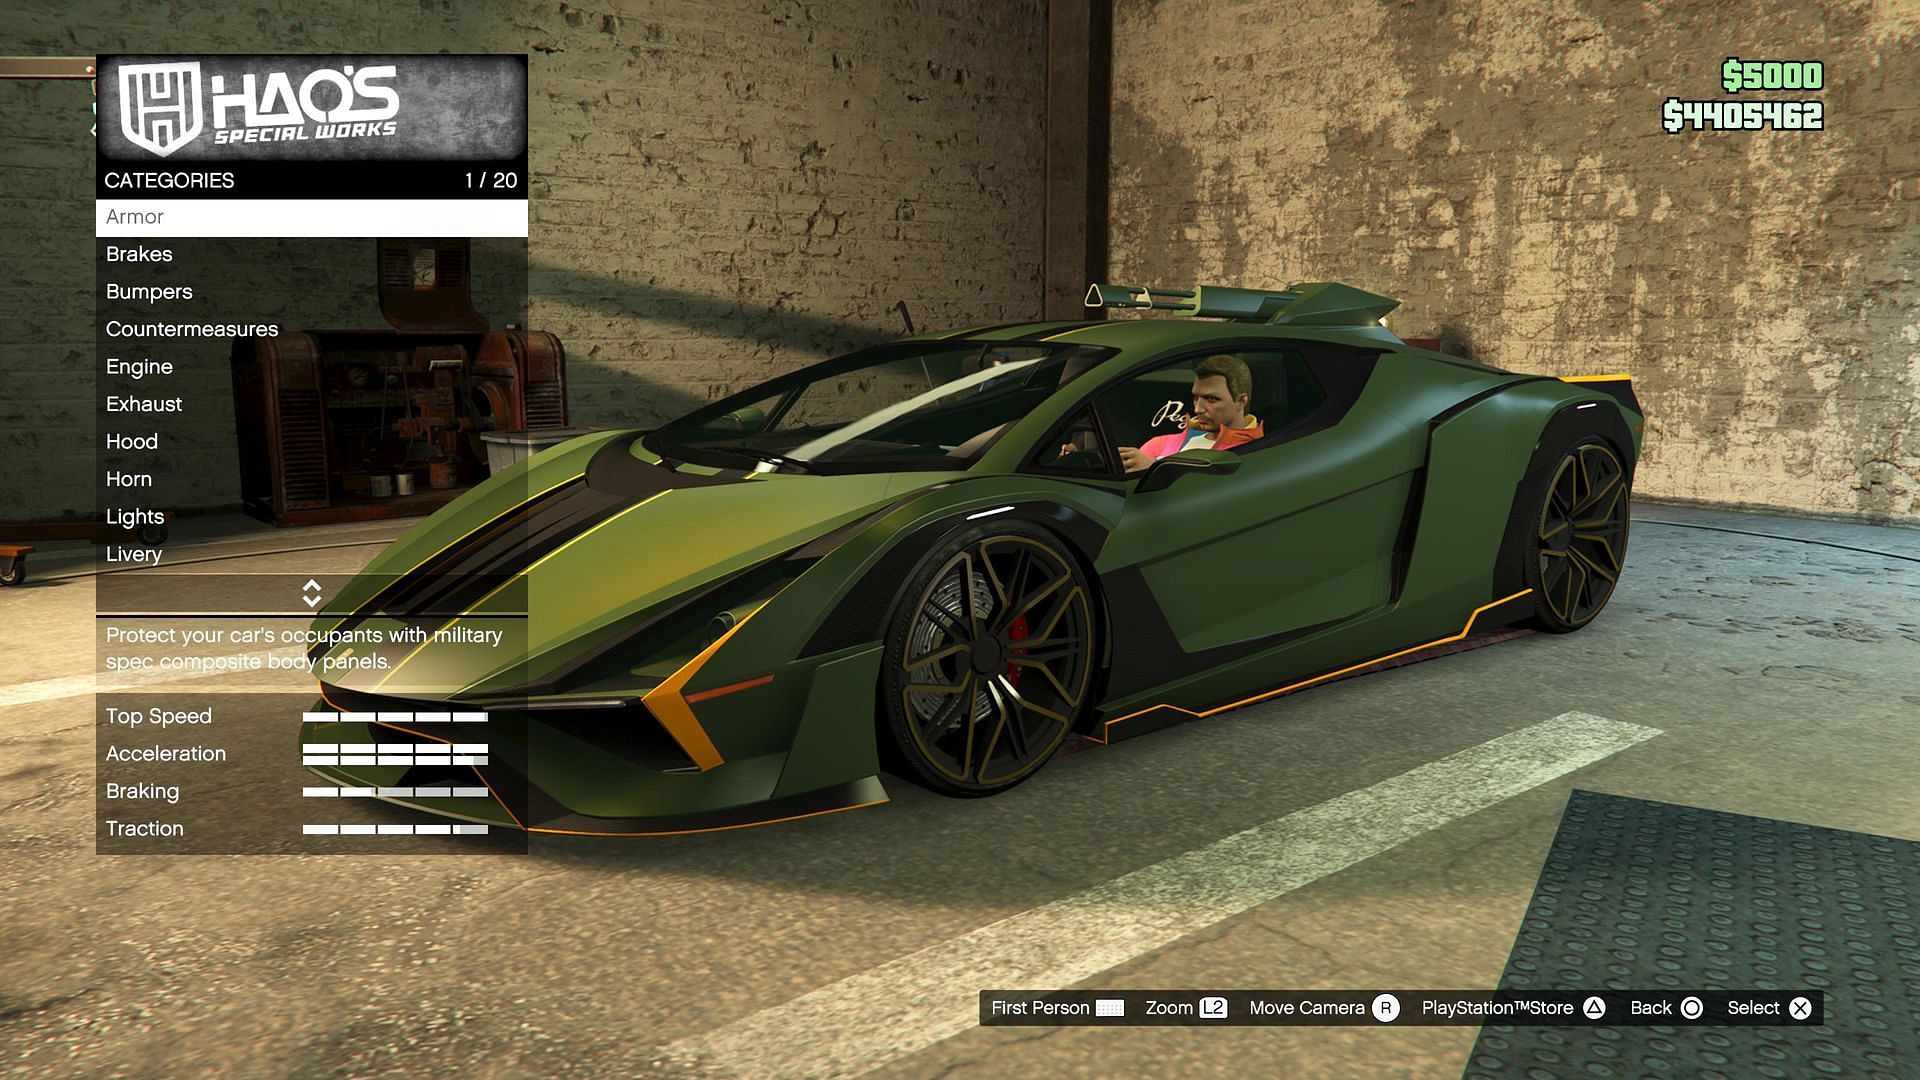 GTA Online beginner guide Where is Hao's Shop, and how to upgrade cars